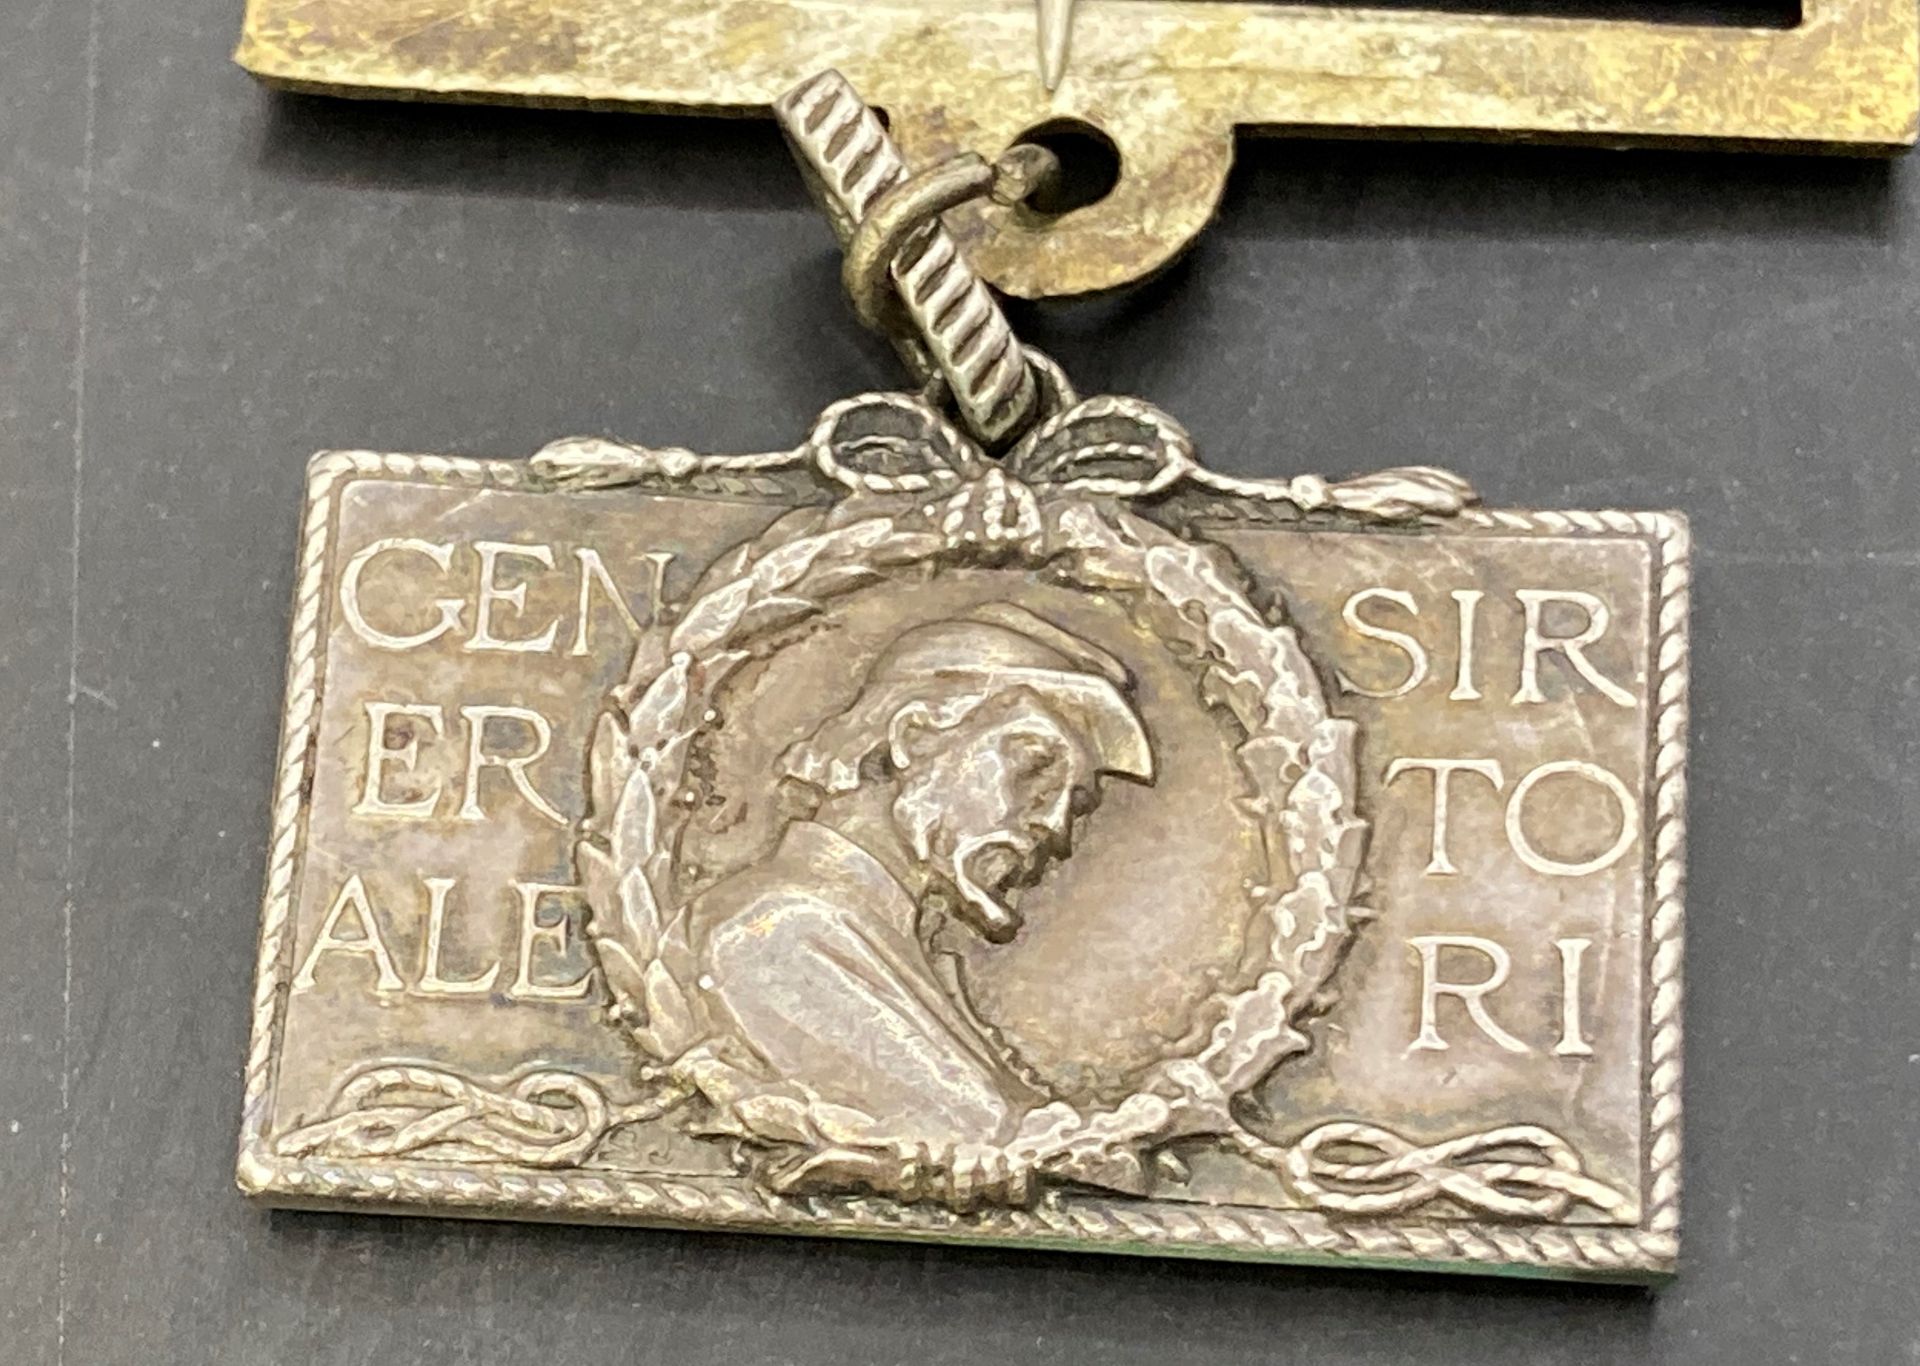 Un-named Medal for the World War One Italian Destroyer RM GUISEPPE SIRTORI. - Image 3 of 3